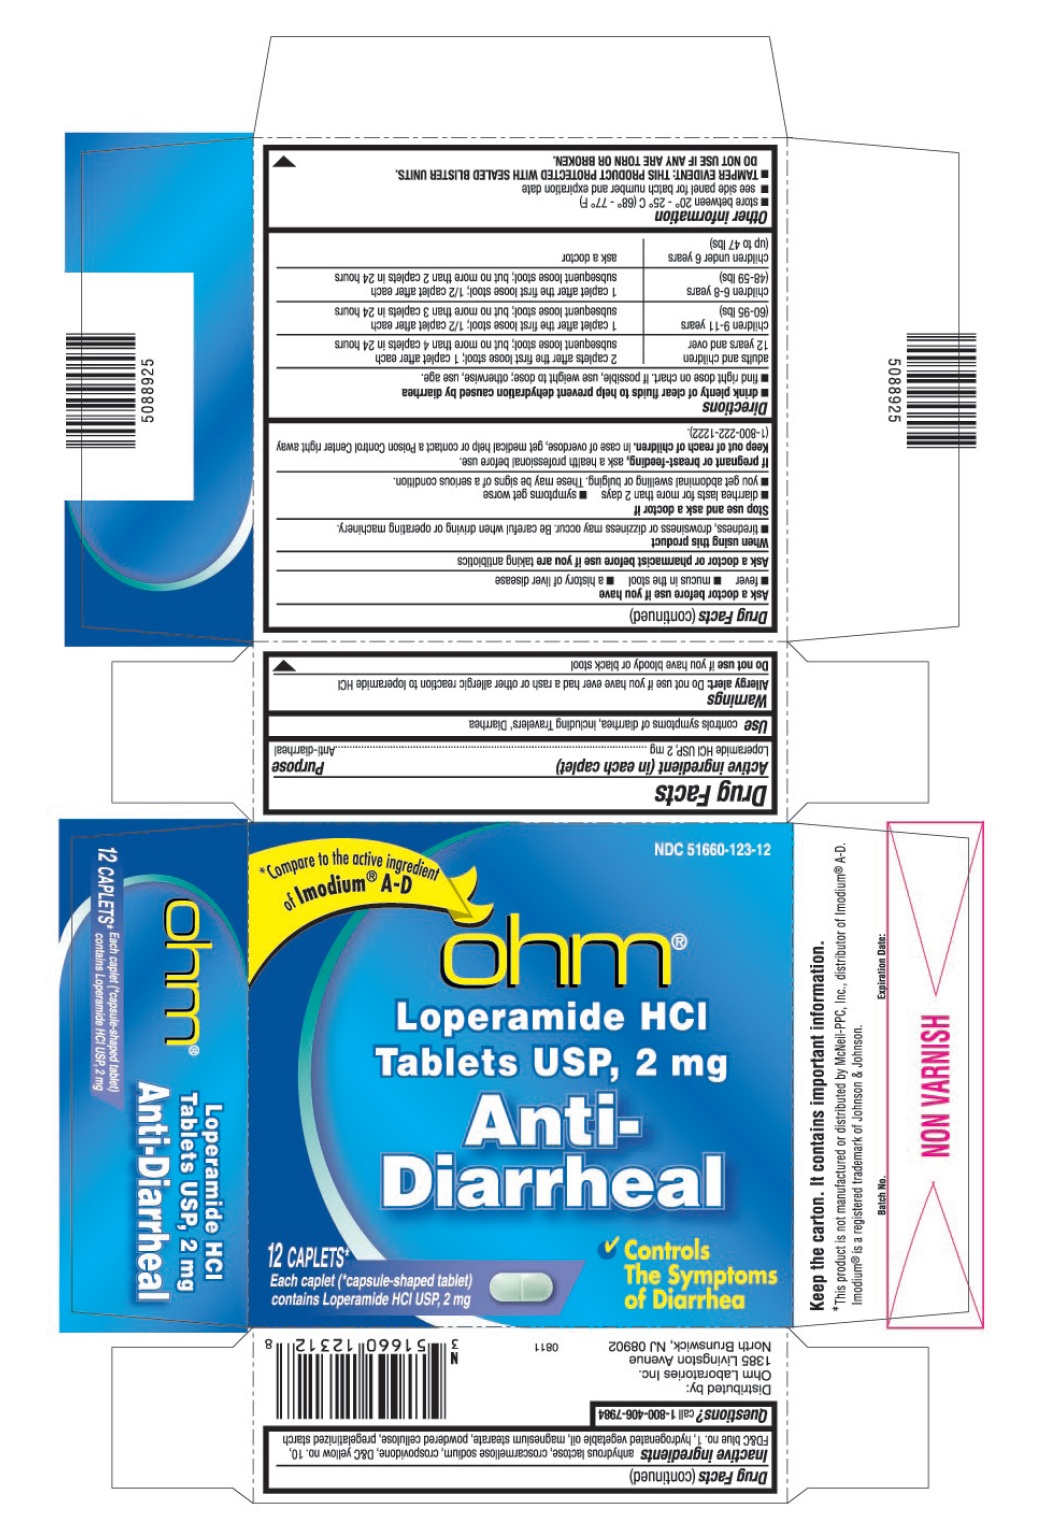 This is the 12 count blister carton label for Loperamide hydrochloride tablets.